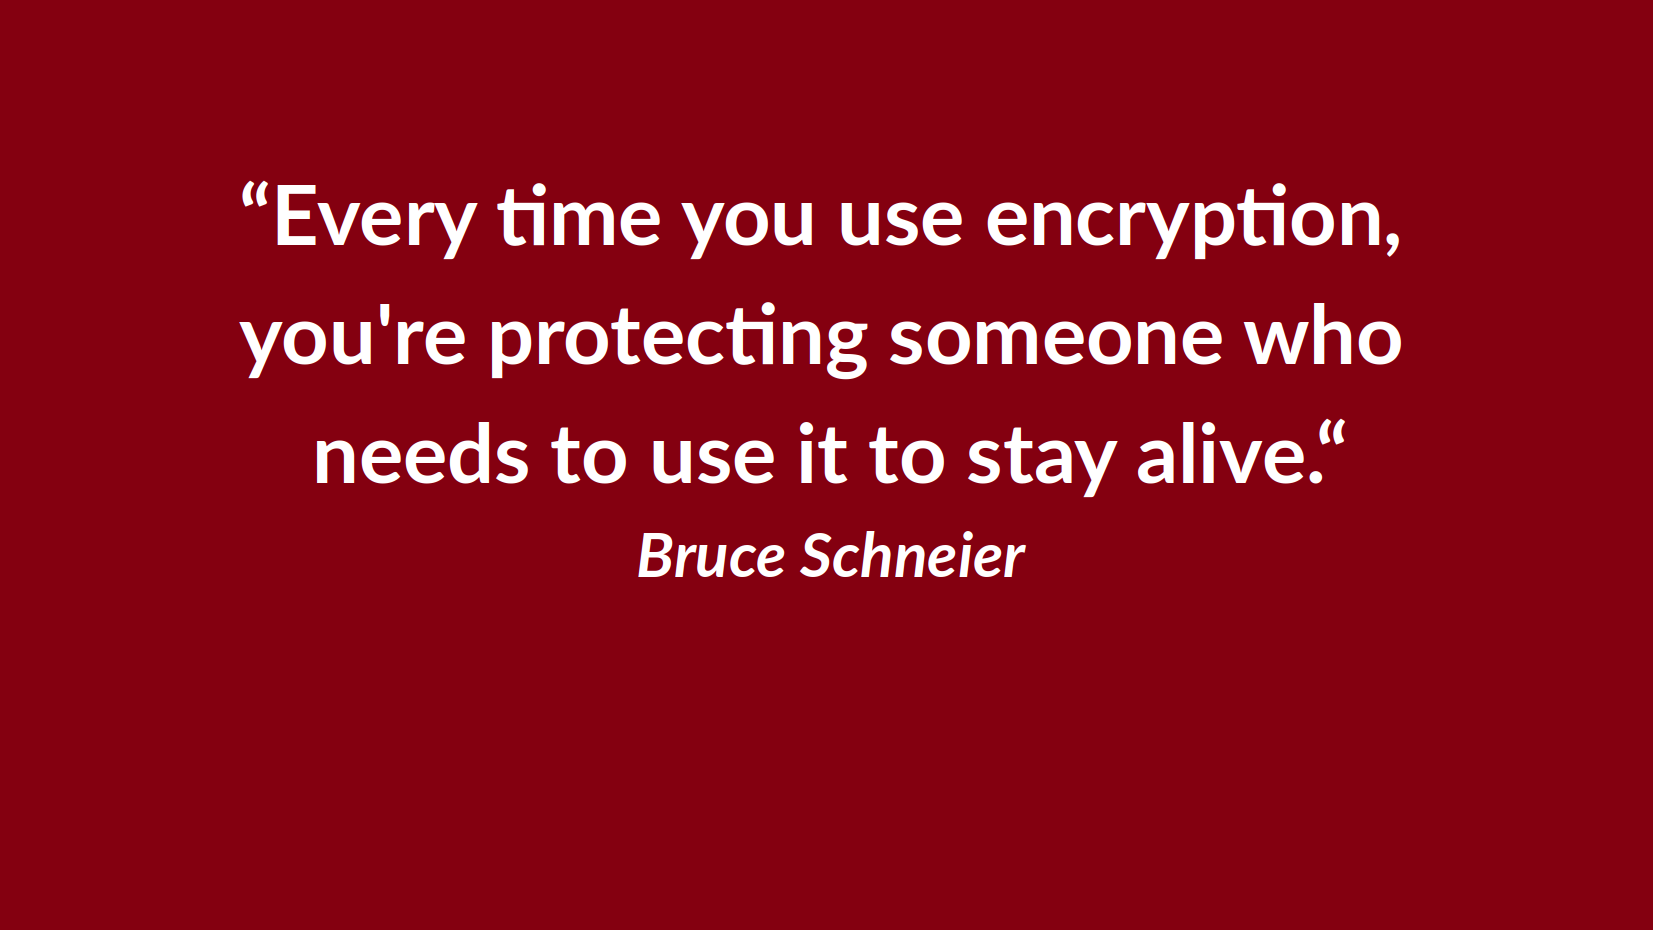 Data privacy day: Encryption protects everyone's privacy